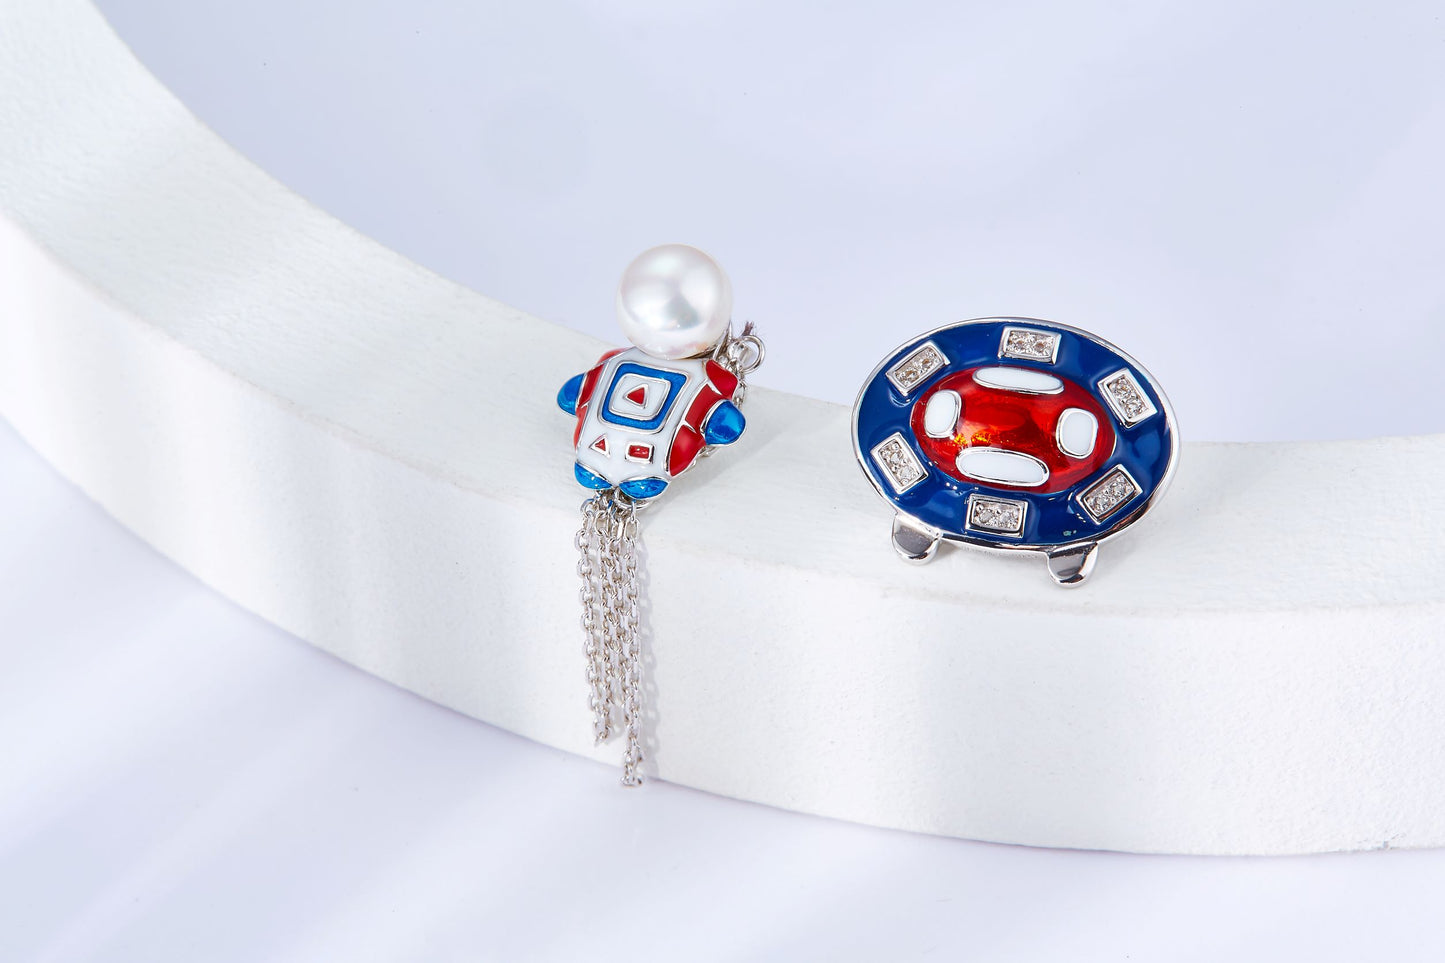 Astronauts Enamel with Pearl Studs and Drop Earrings for Women